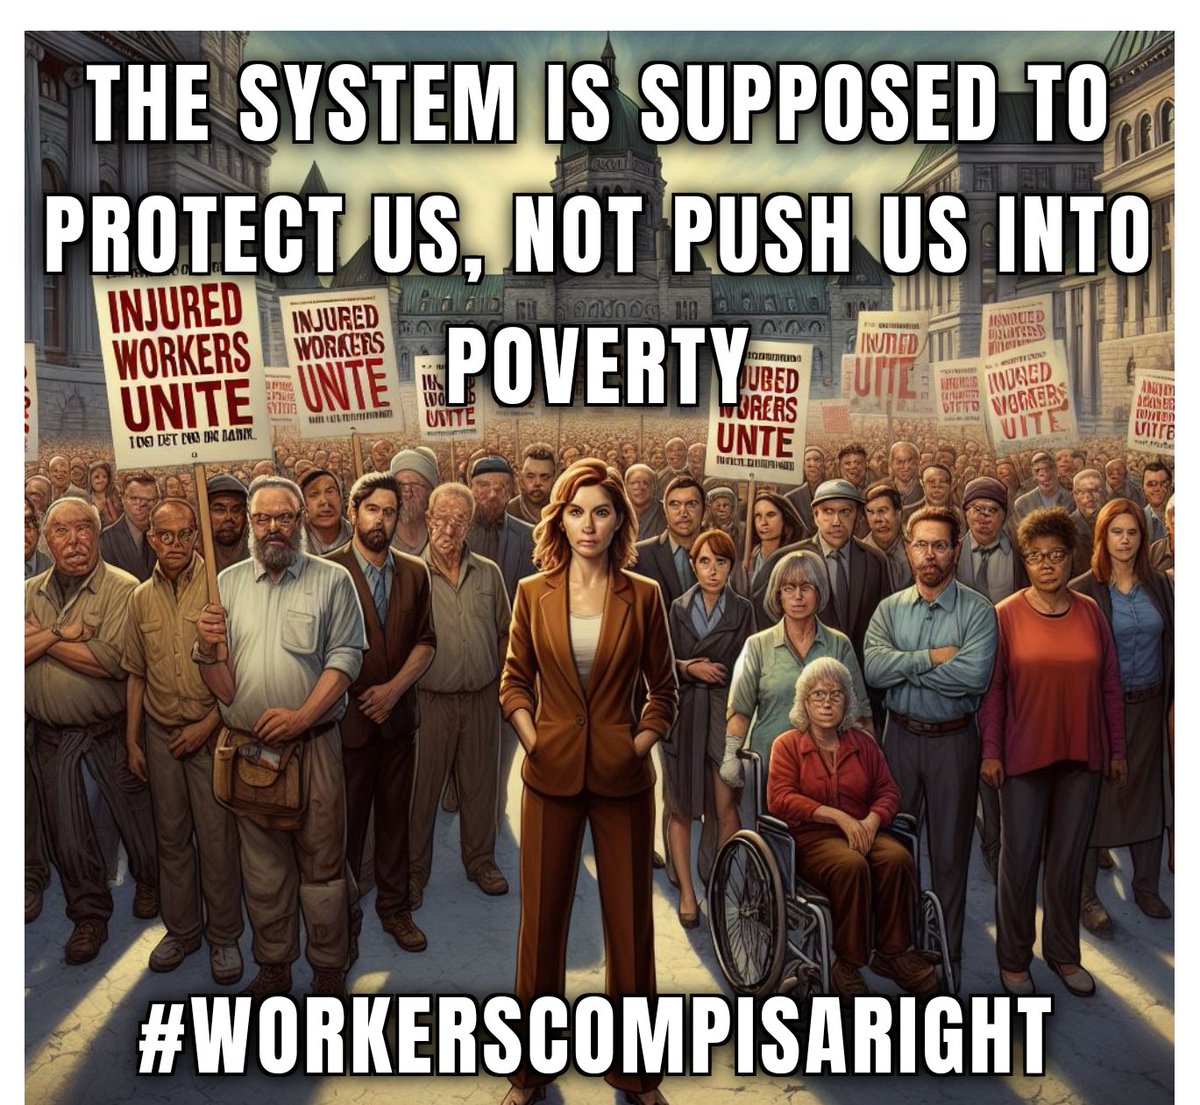 The system is supposed to protect us, not push us into poverty. 
Let's fight for fair treatment and dignity for all workers! #WorkersCompIsARight #InjuredWorkers #FairTreatment